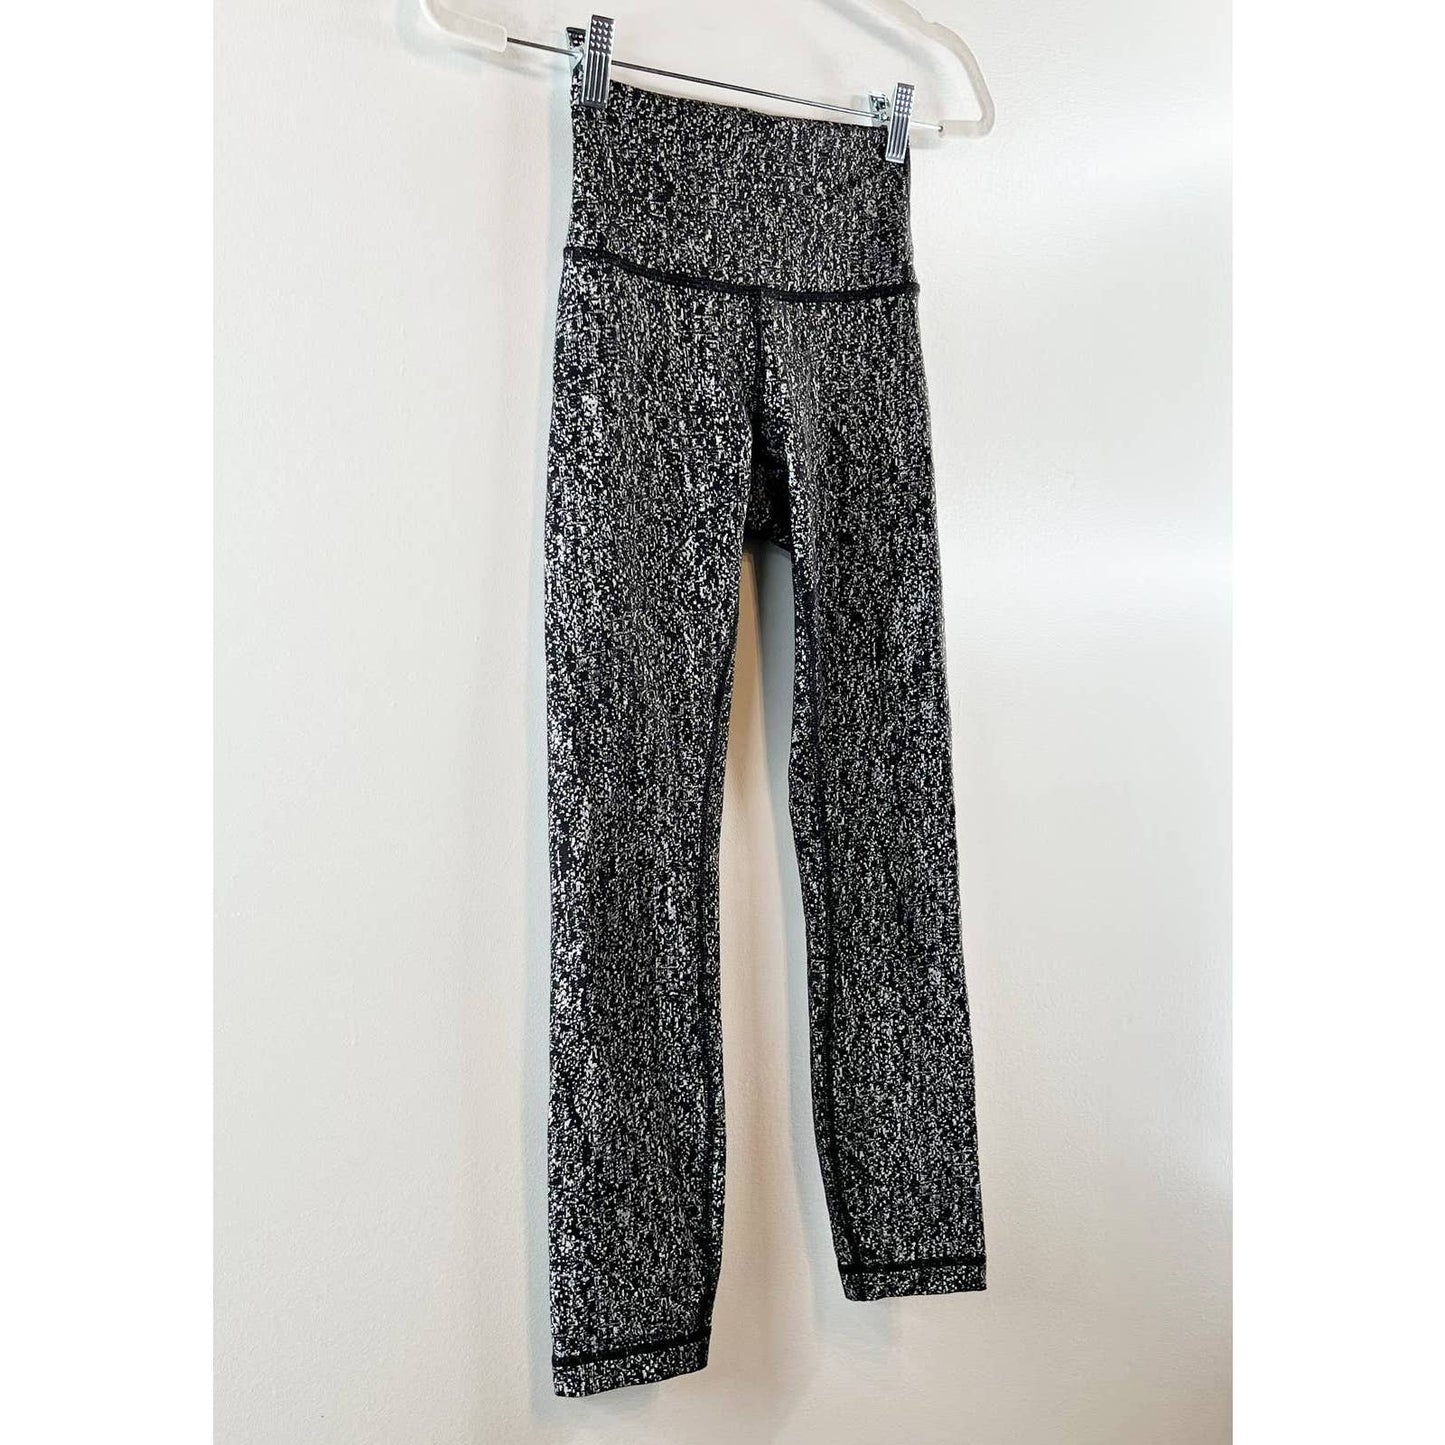 Lululemon Align High-Rise Cropped 7/8 Leggings Pant Stretch Speckled Gray 2